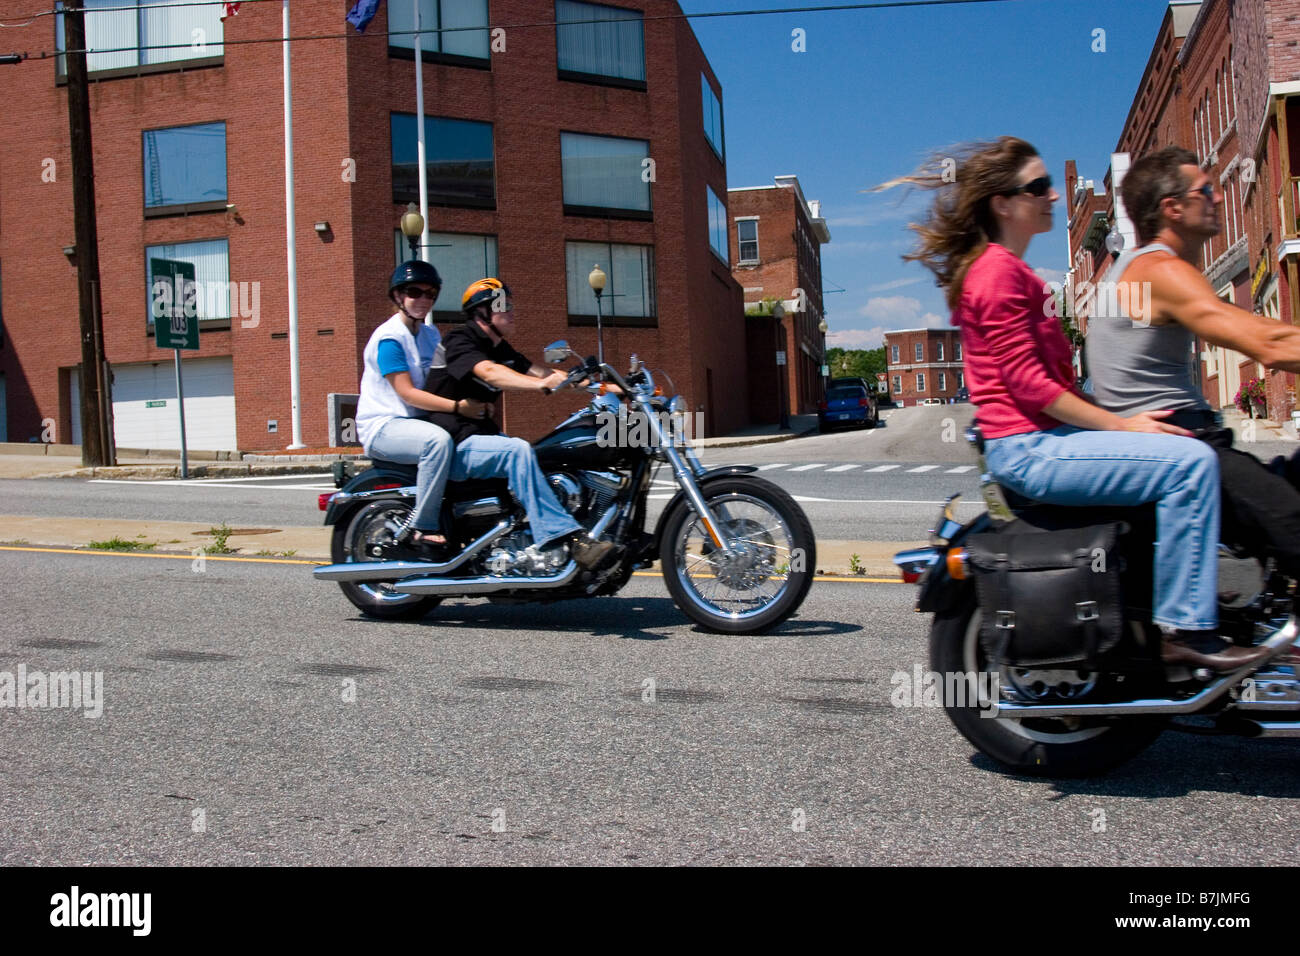 Two couples ride motorcycles through town on a sunny summer day Stock Photo